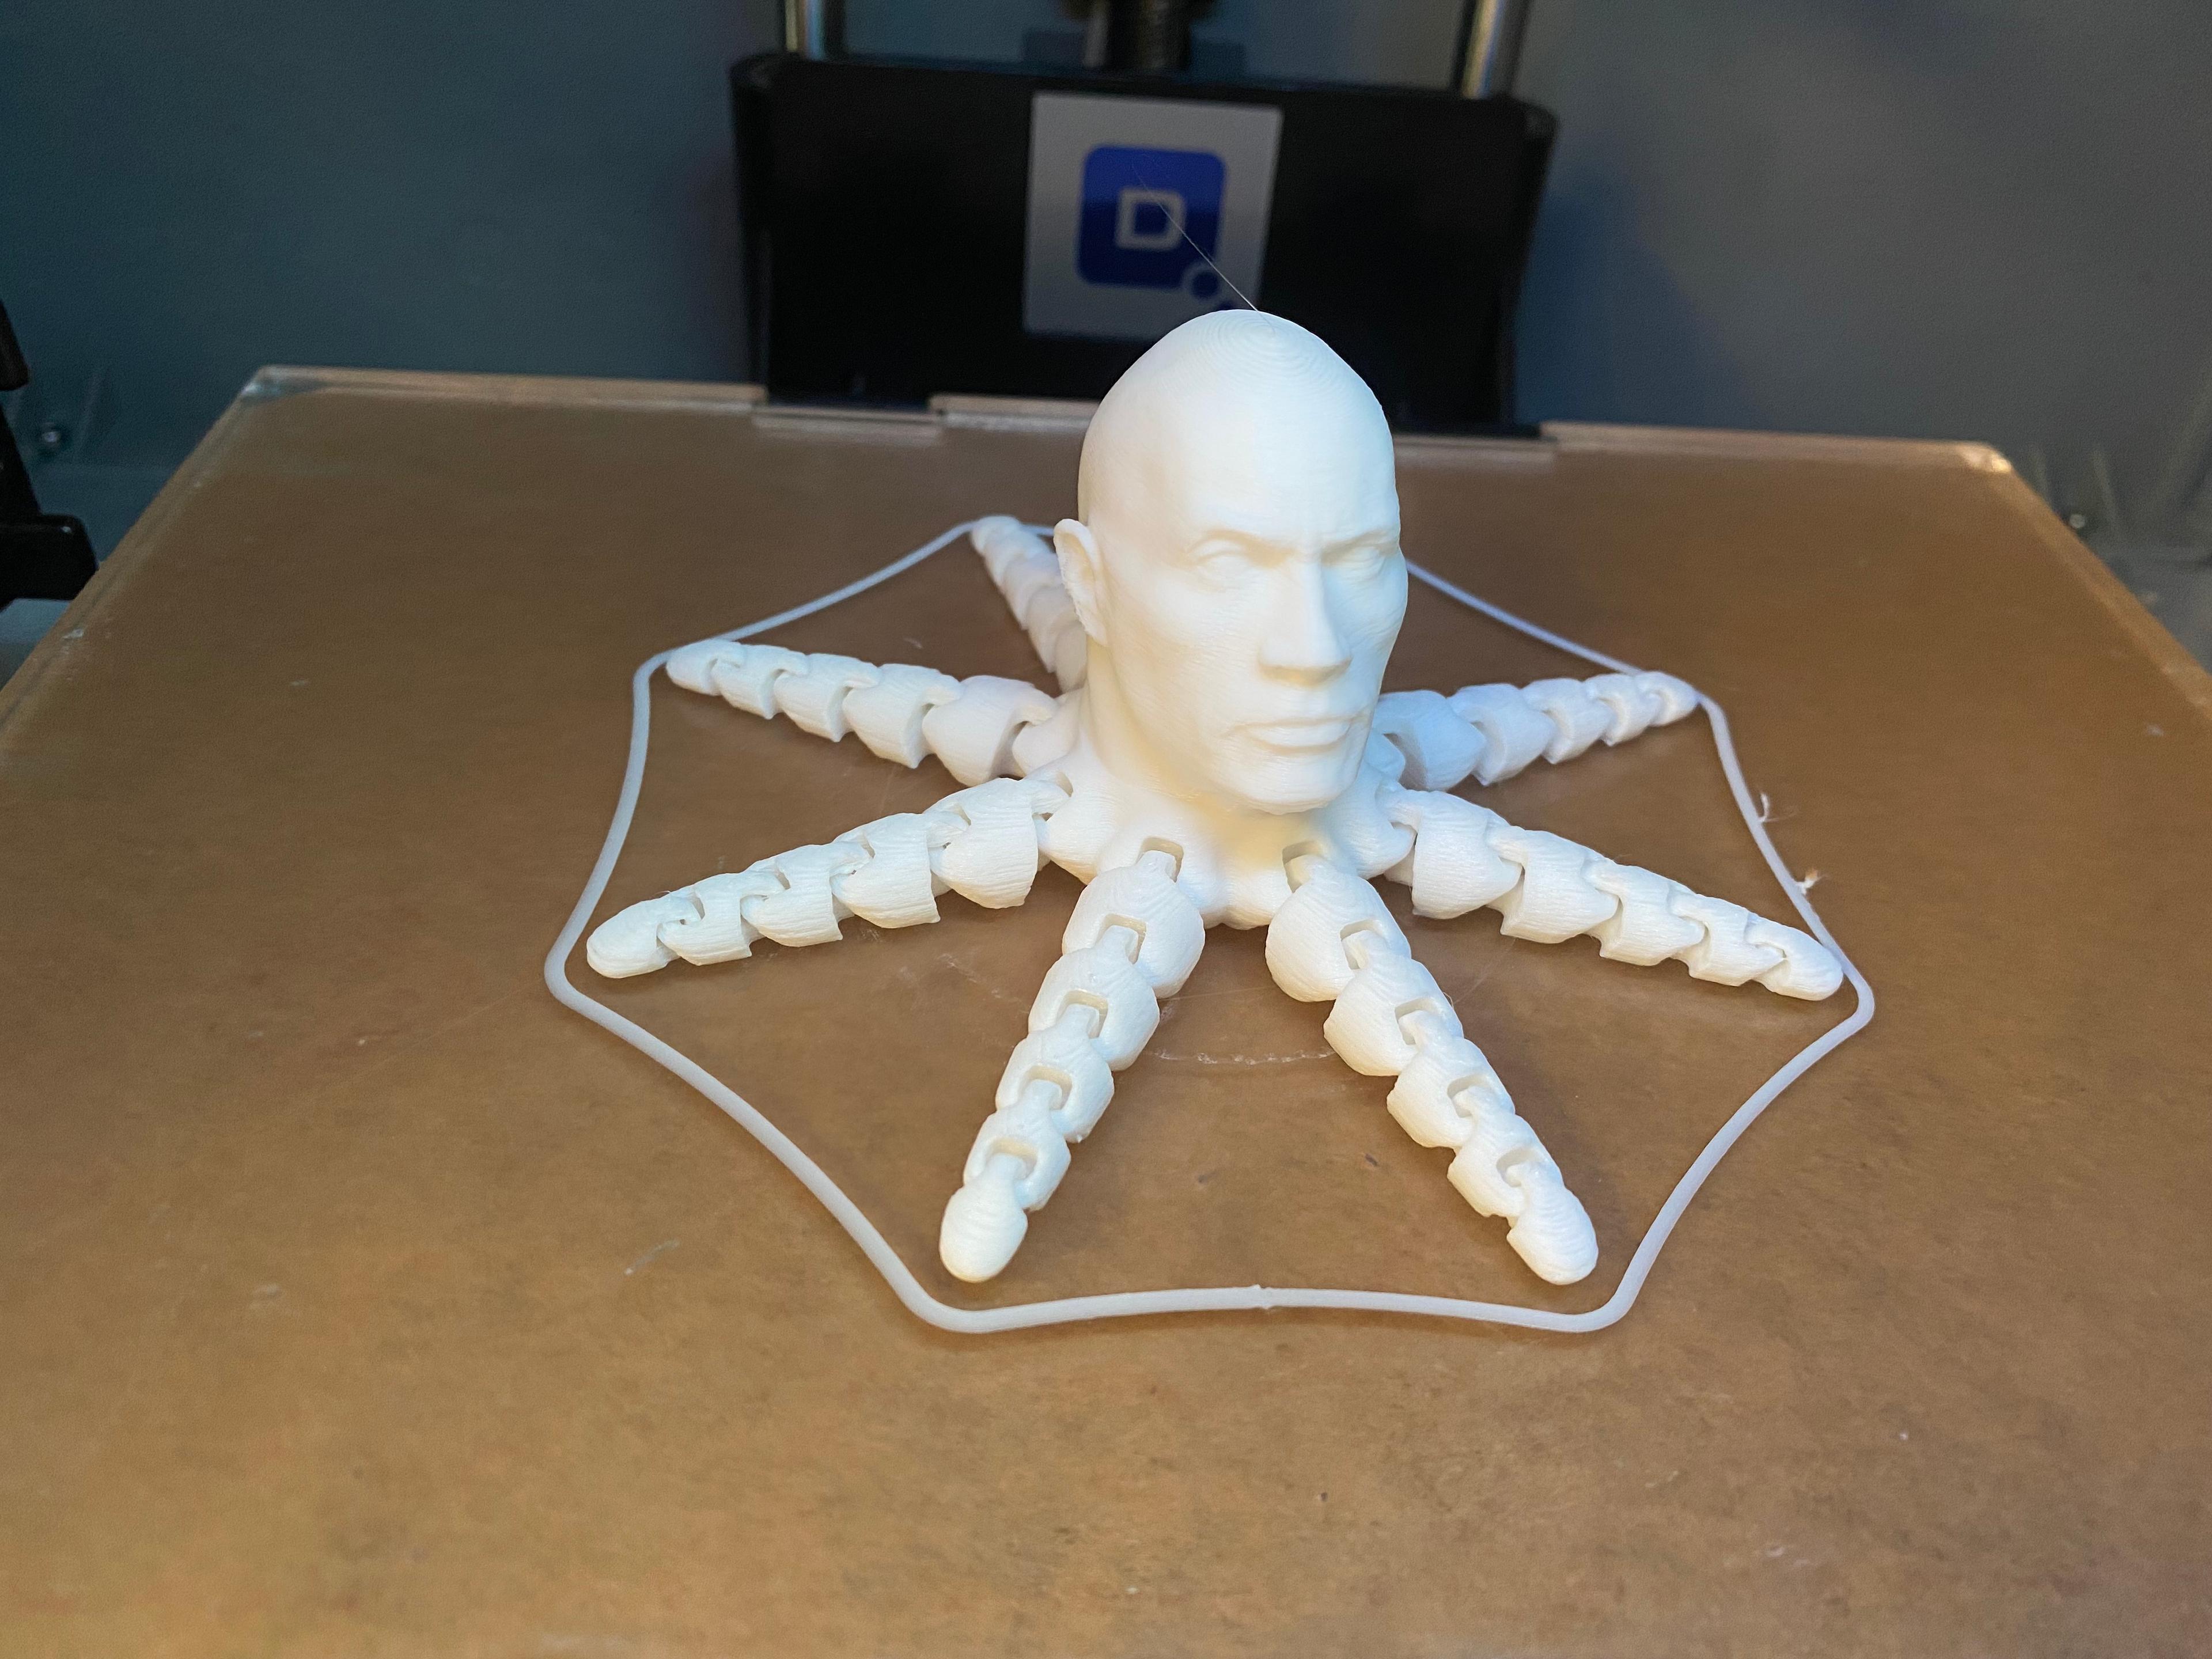 ROCKTOPUS - Love this snapped a photo before i even removed it from build platform - 3d model